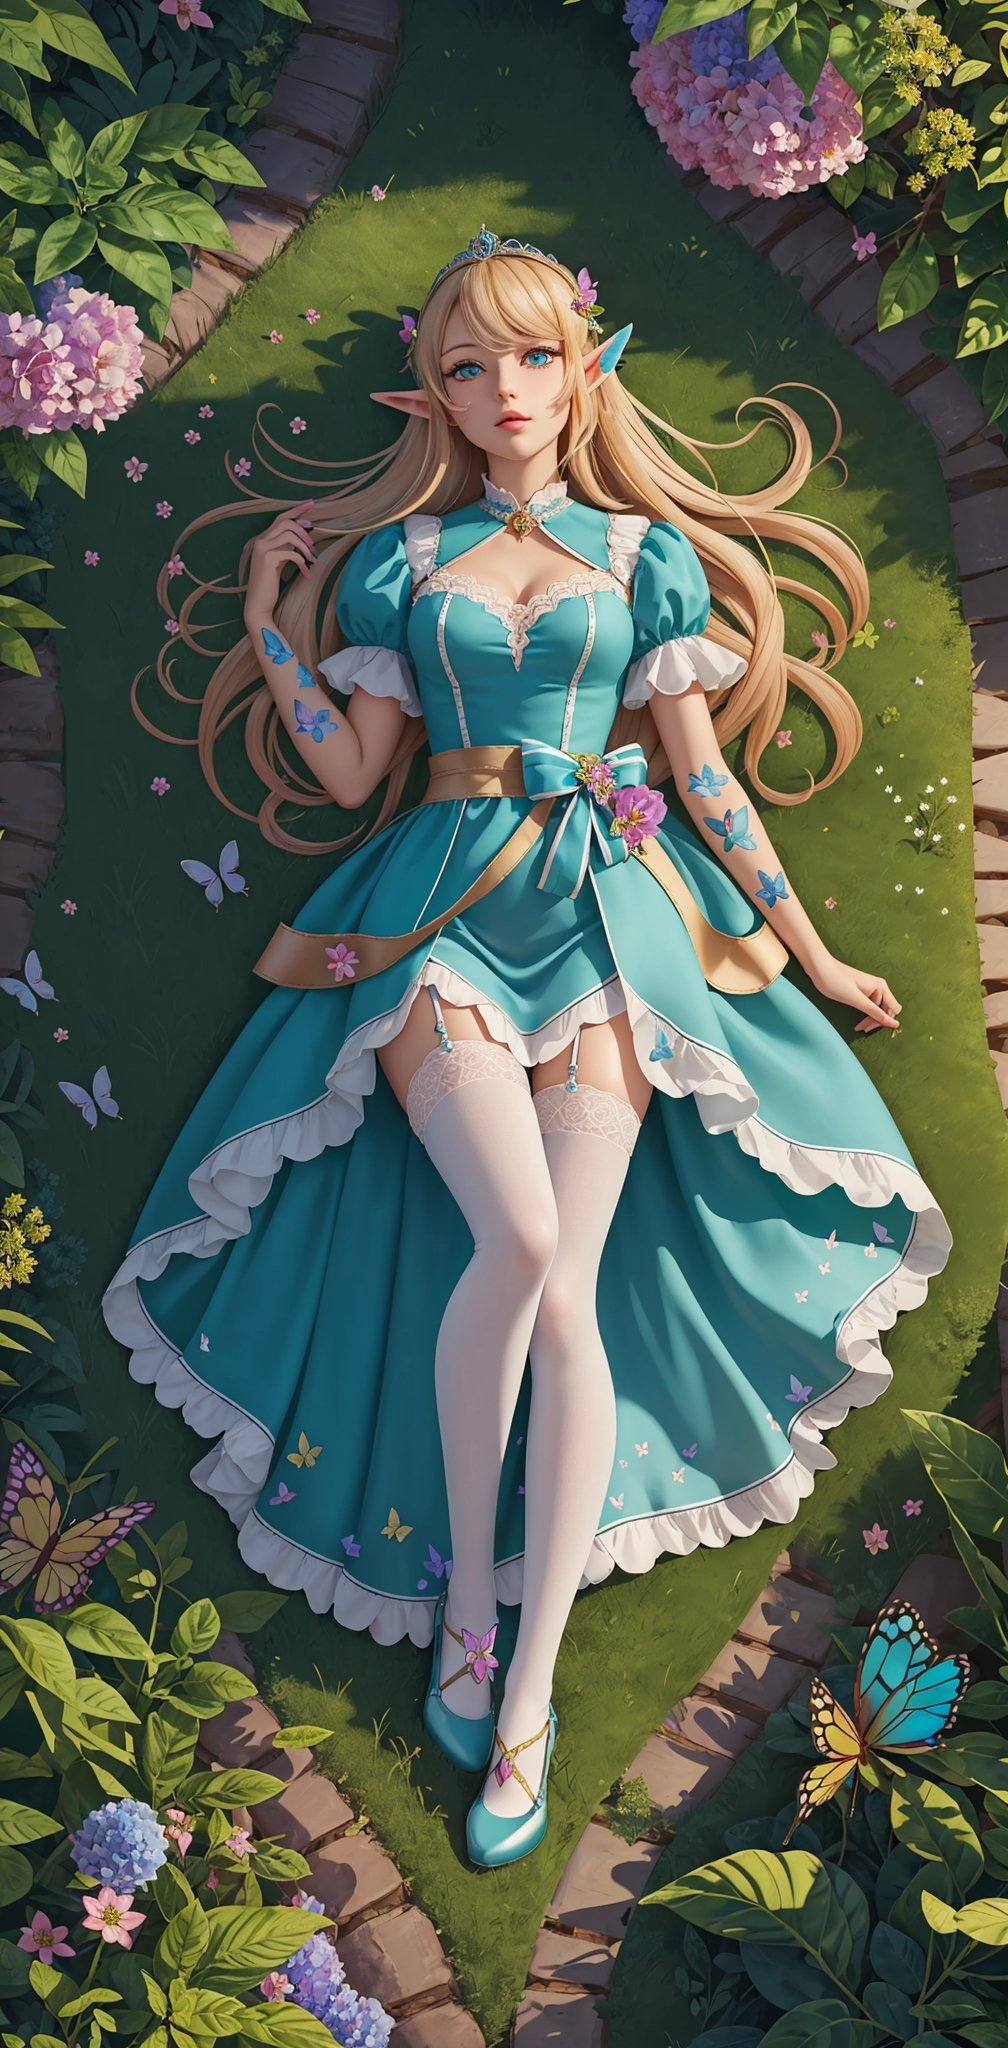 (best quality, masterpiece, illustration, designer, lighting), (extremely detailed CG 8k wallpaper unit), (detailed and expressive eyes), detailed particles, beautiful lighting, a cute girl, very long blonde hair, wearing a teddy bear tiara, donning a beautiful green and white dress with ruffles and lace, sheer carteus stockings, transparent aquamarine crystal shoes, bows around her waist (elf in forest), butterflies around, (Pixiv anime style),(manga style),background, garden, colored flowers,butterflies, flowers, flowers covering her, (aerial view), grass, leaning on flowers, lying down,  looking to viewer, flower background,road of flowers,drow,fashion_girl